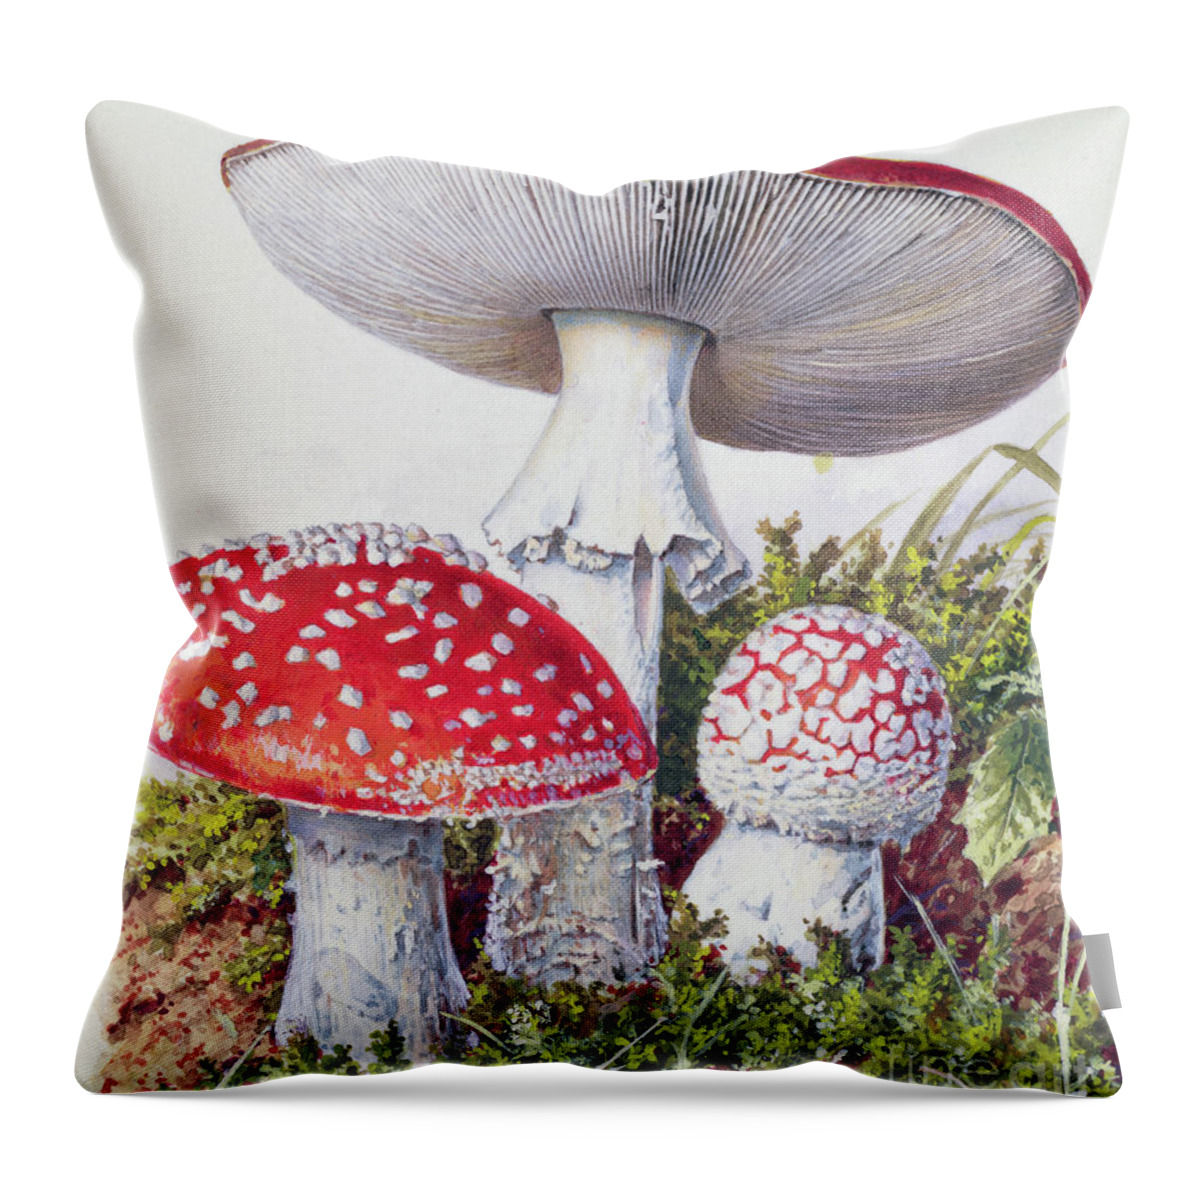 Mushrooms Throw Pillow featuring the painting Study Of Fungus by Josef Fleischmann